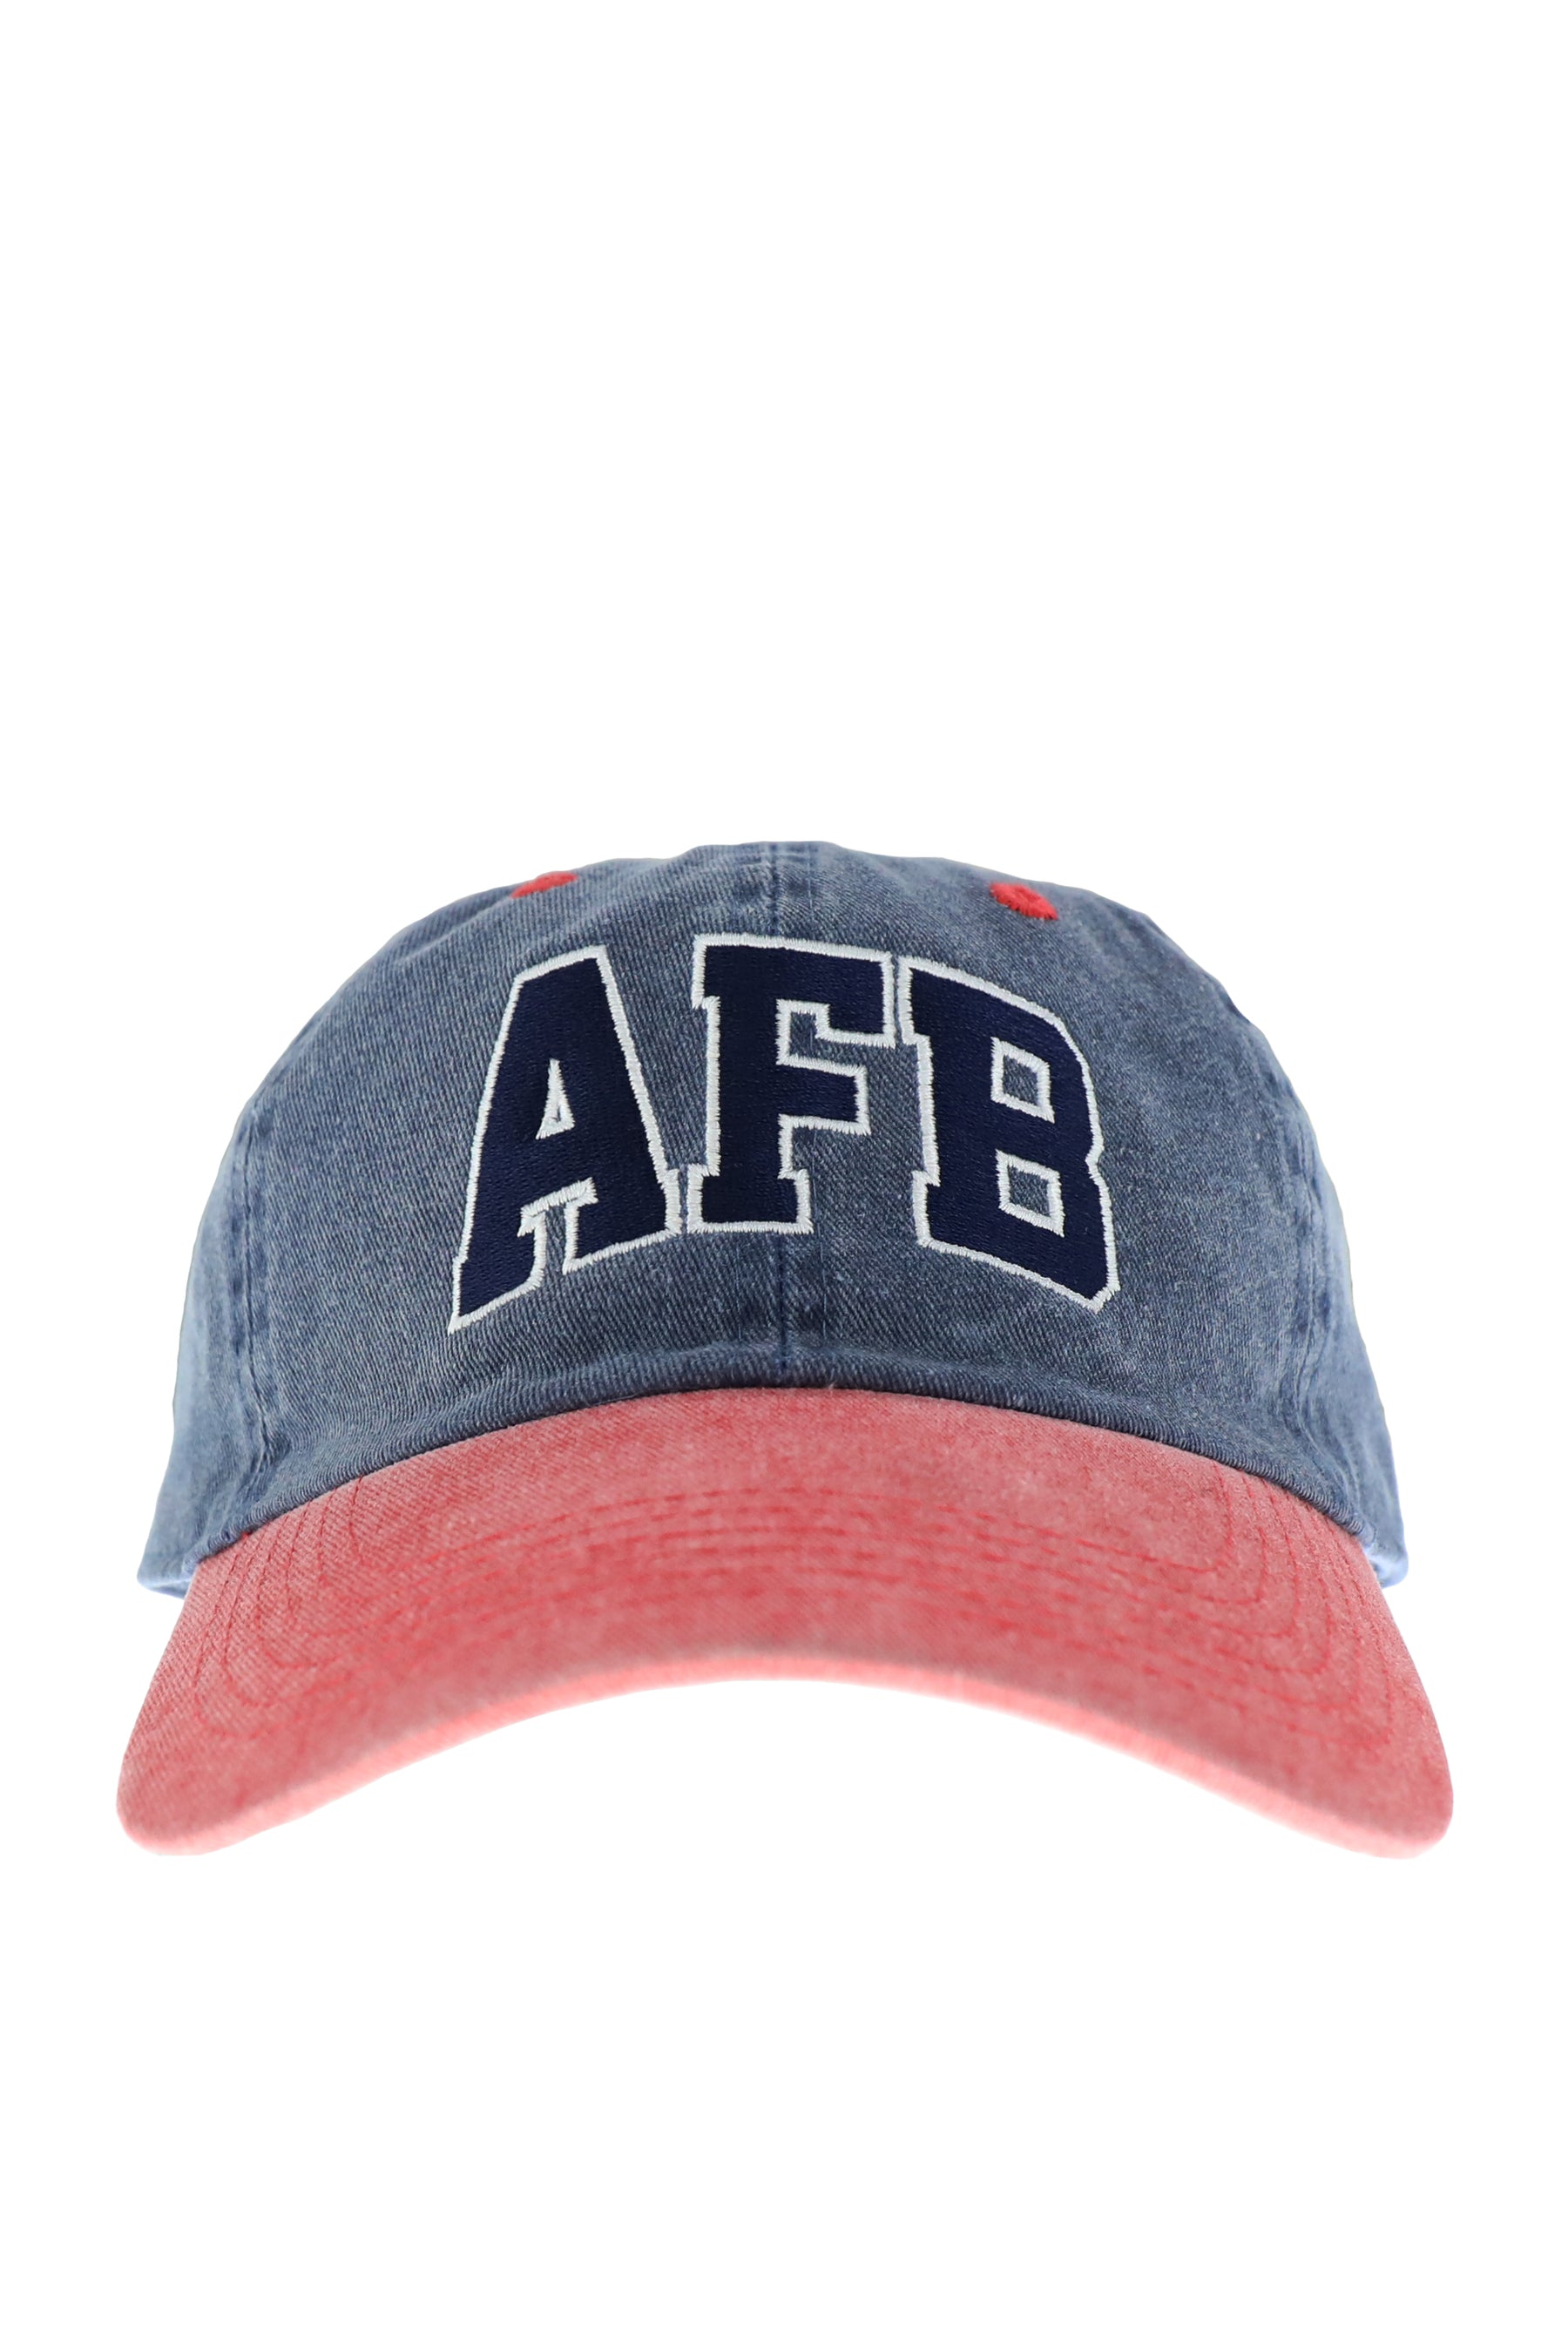 / NVY AFB RED / SS23 -NUBIAN LOGO CAP CLASSIC